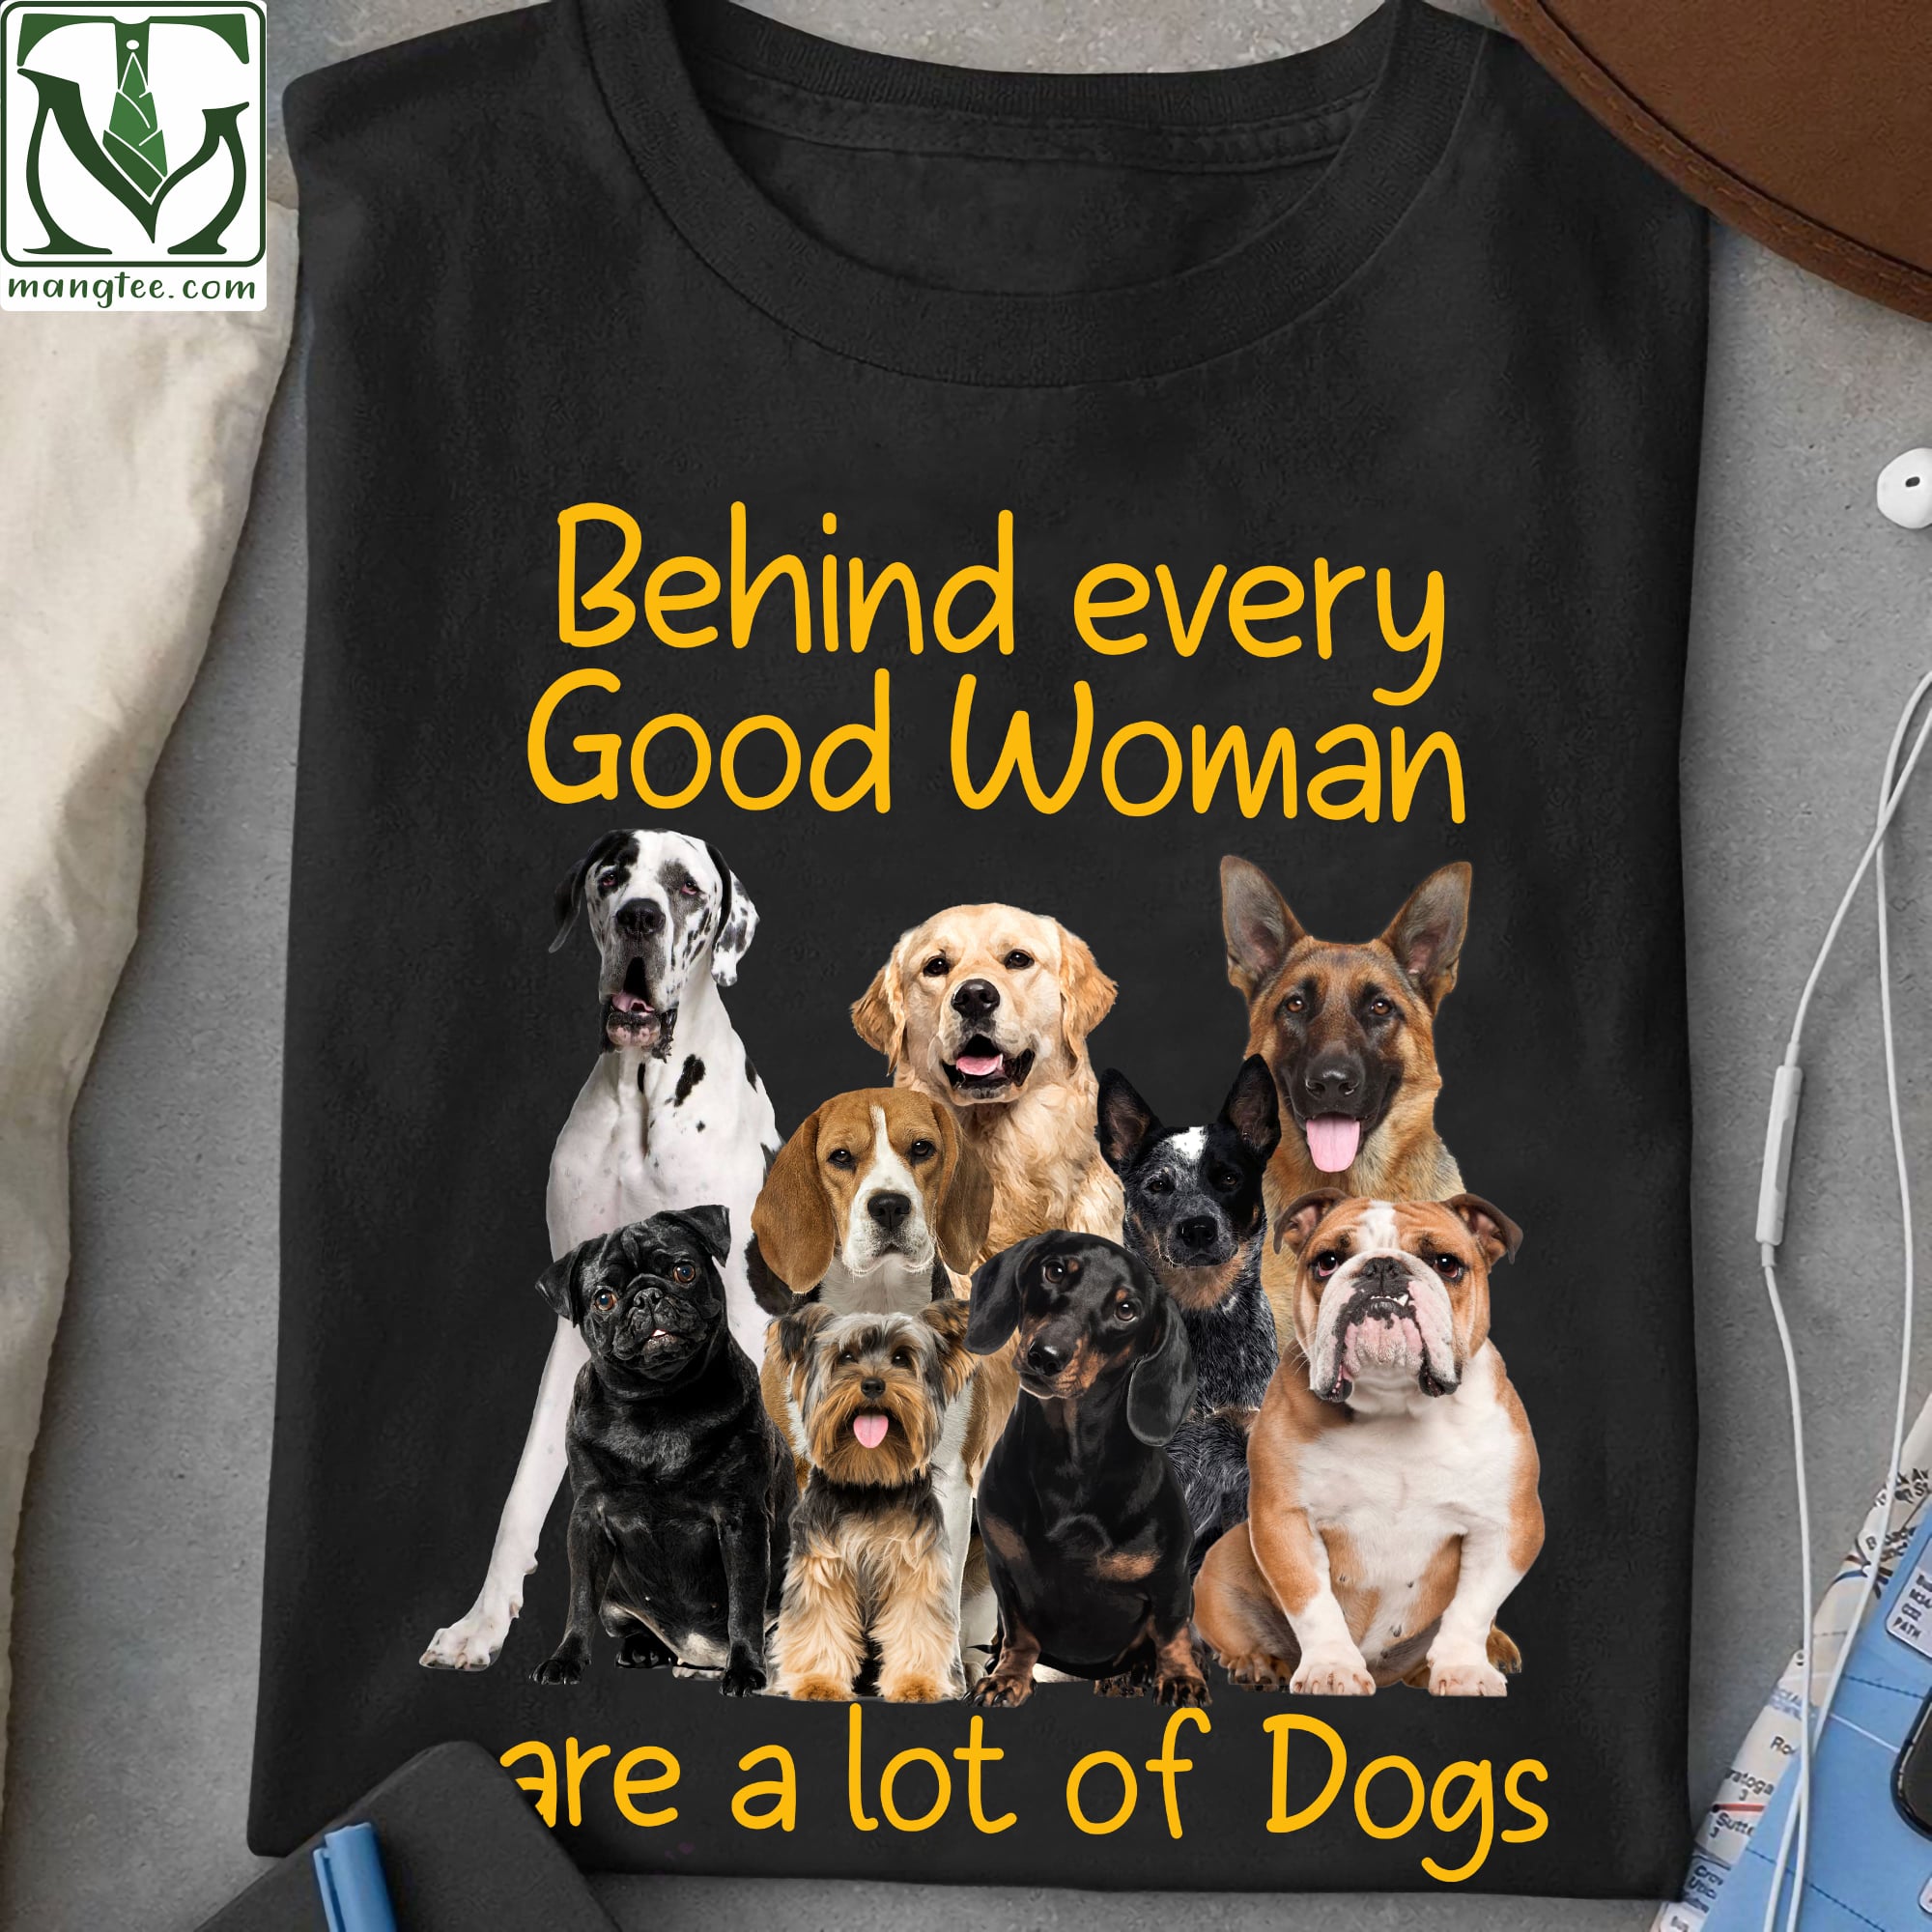 Behind every good woman are a lot of dogs